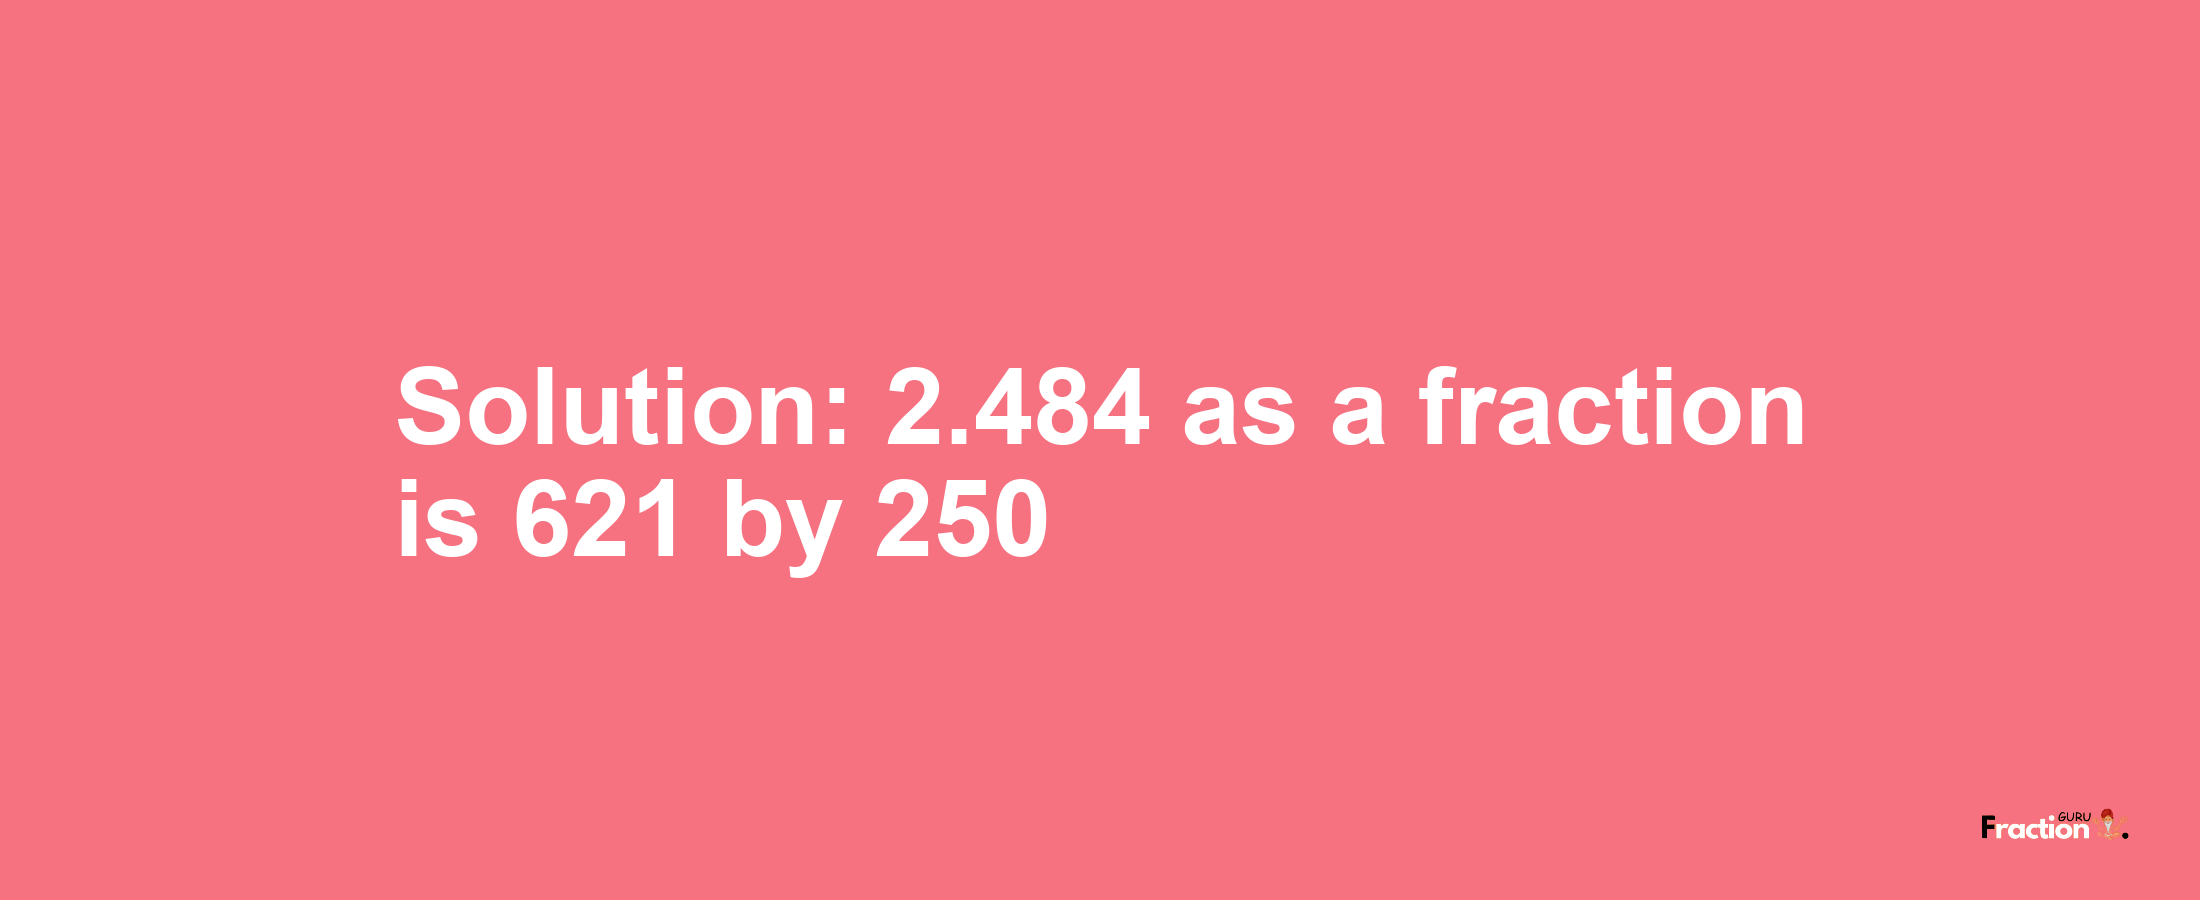 Solution:2.484 as a fraction is 621/250